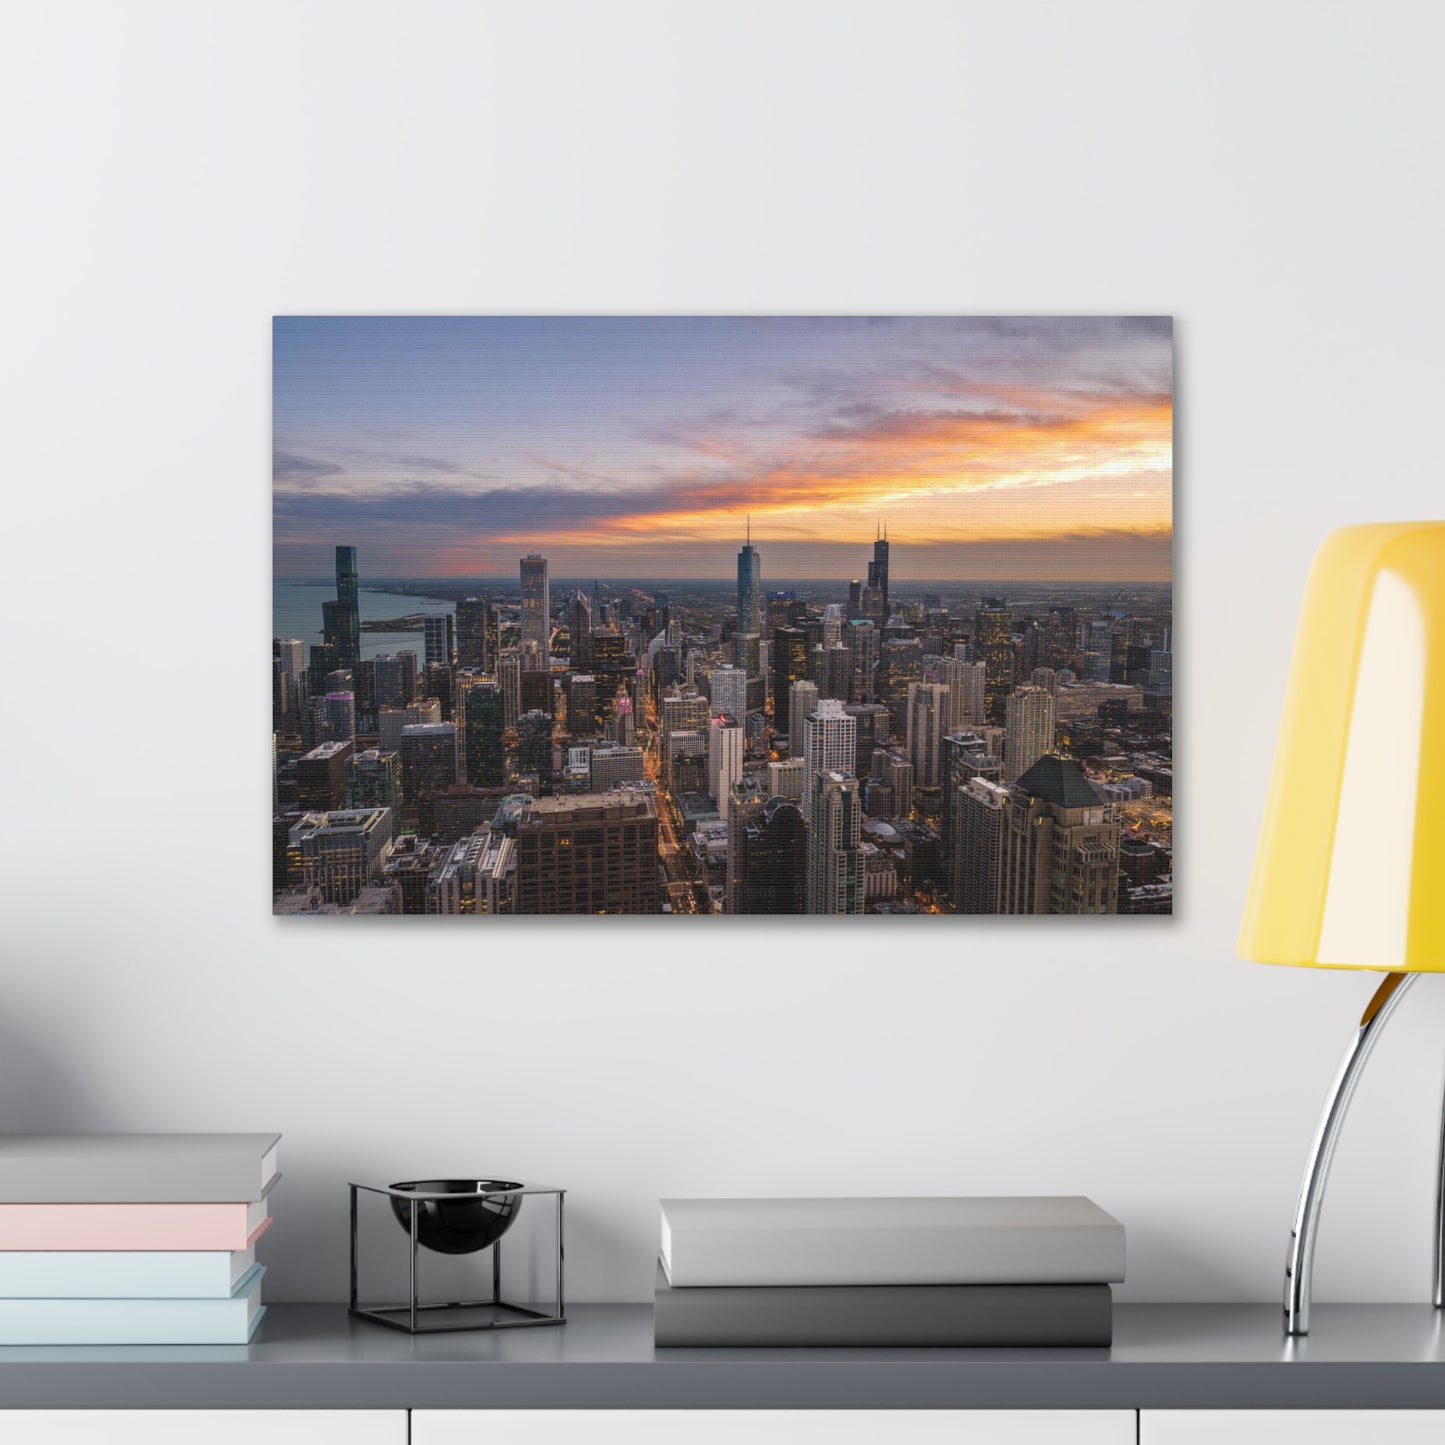 Dusk Chicago Skyline Sunset - Canvas Wall Print (Free Shipping)